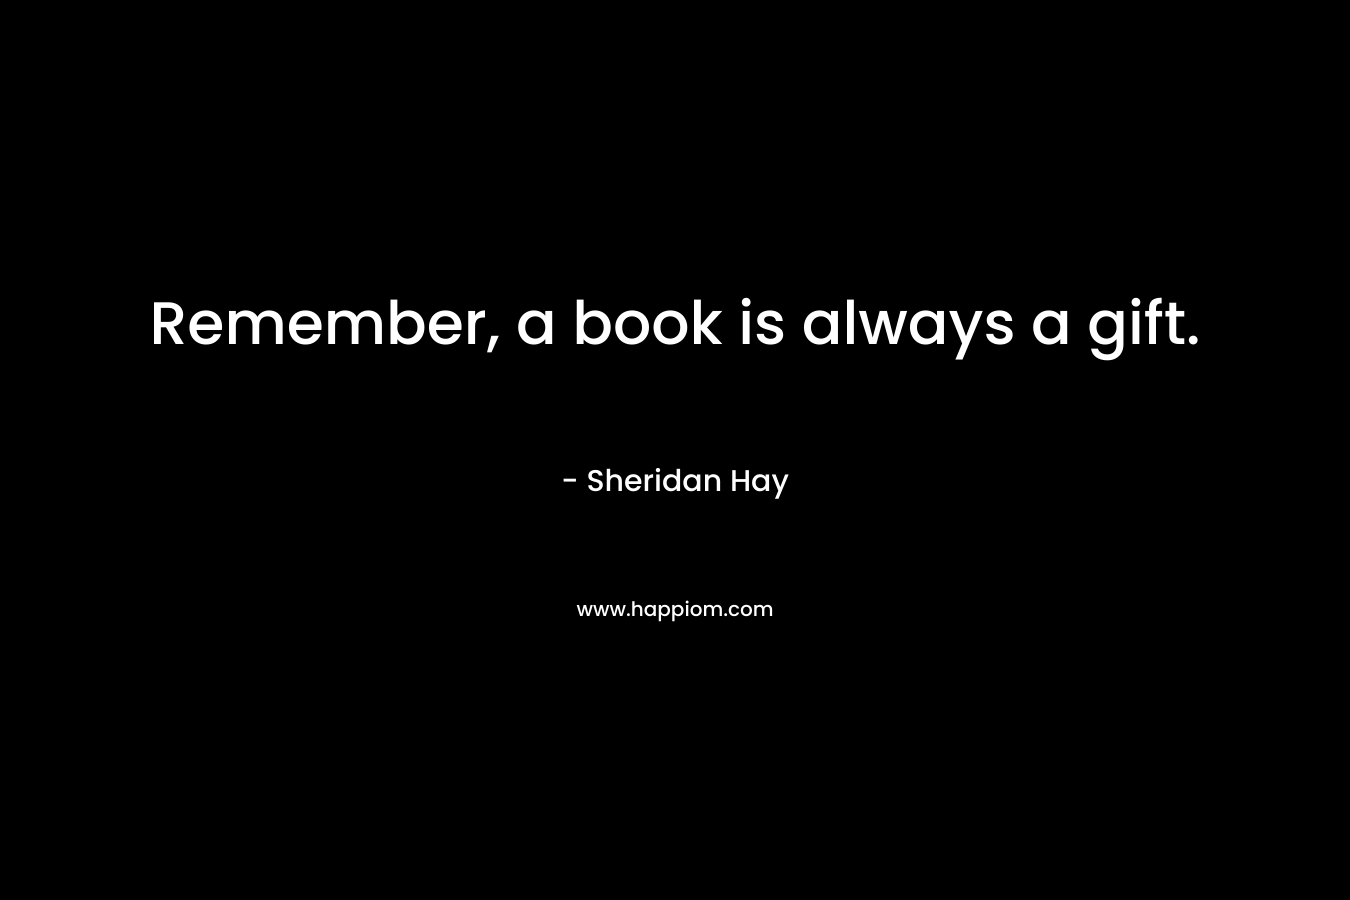 Remember, a book is always a gift.